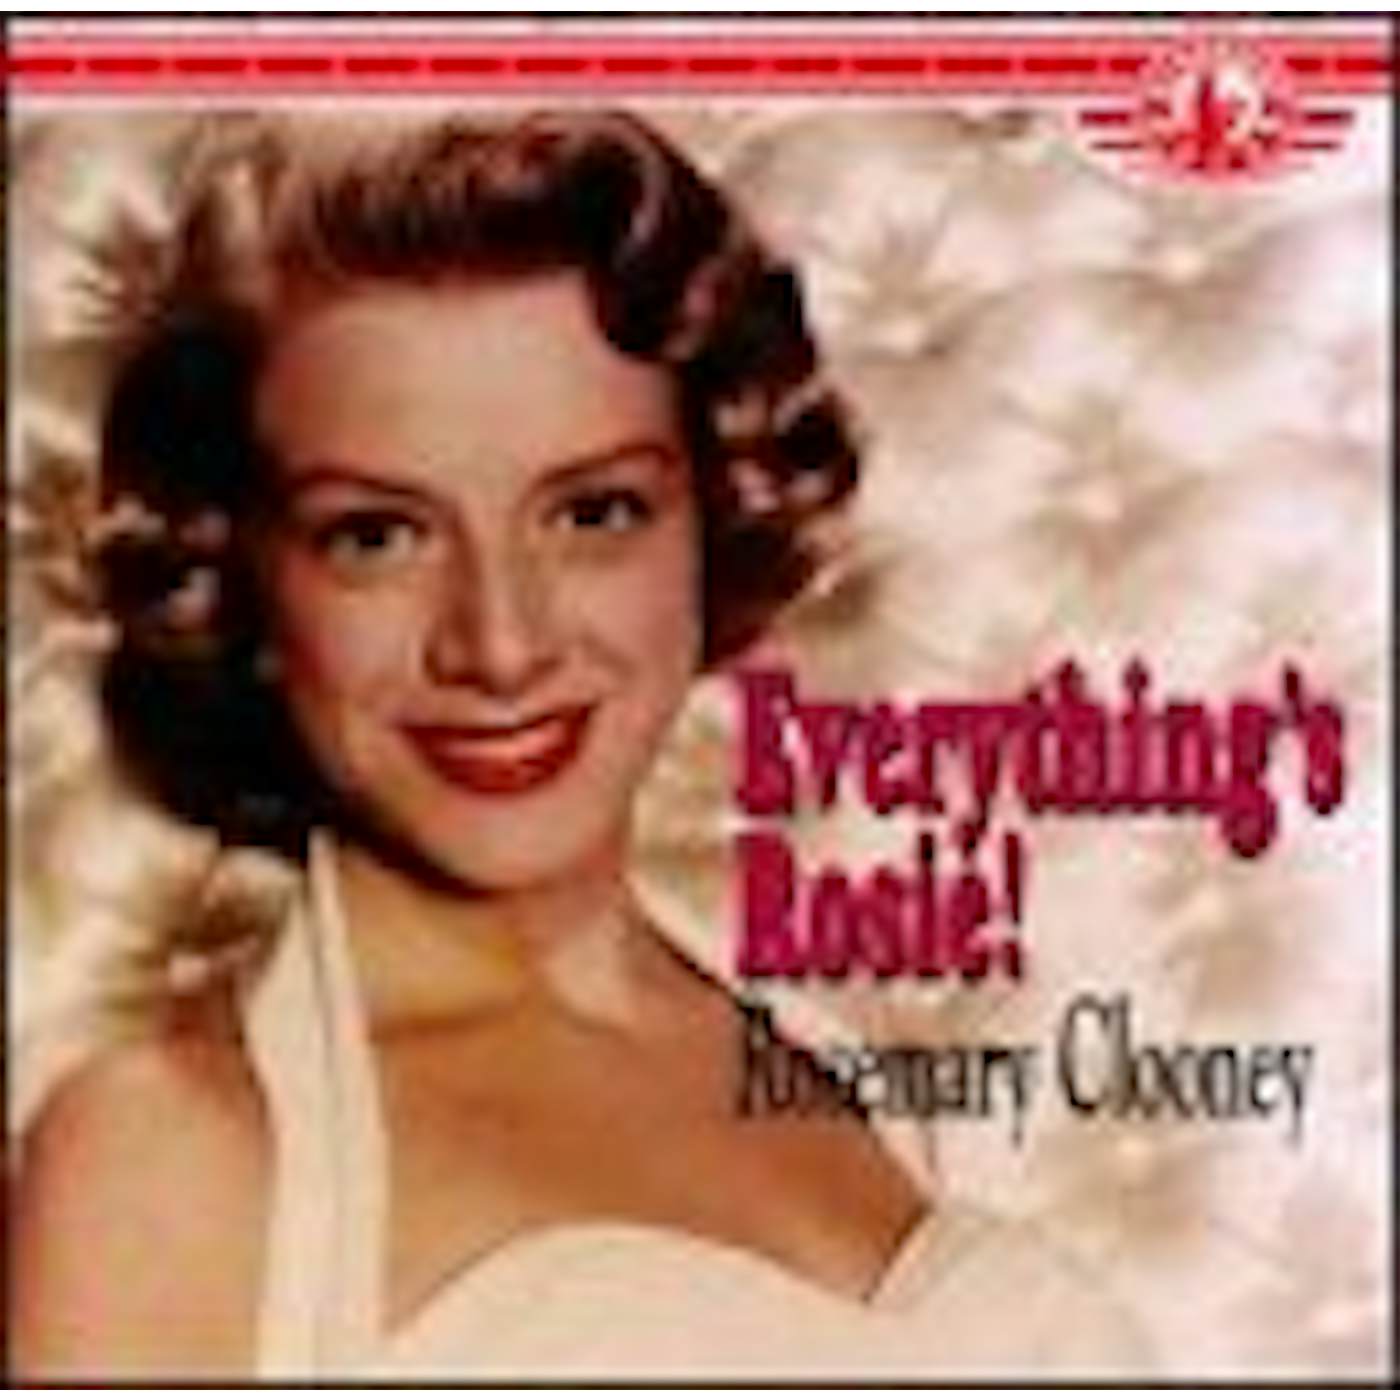 Rosemary Clooney EVERYTHING'S ROSIE CD